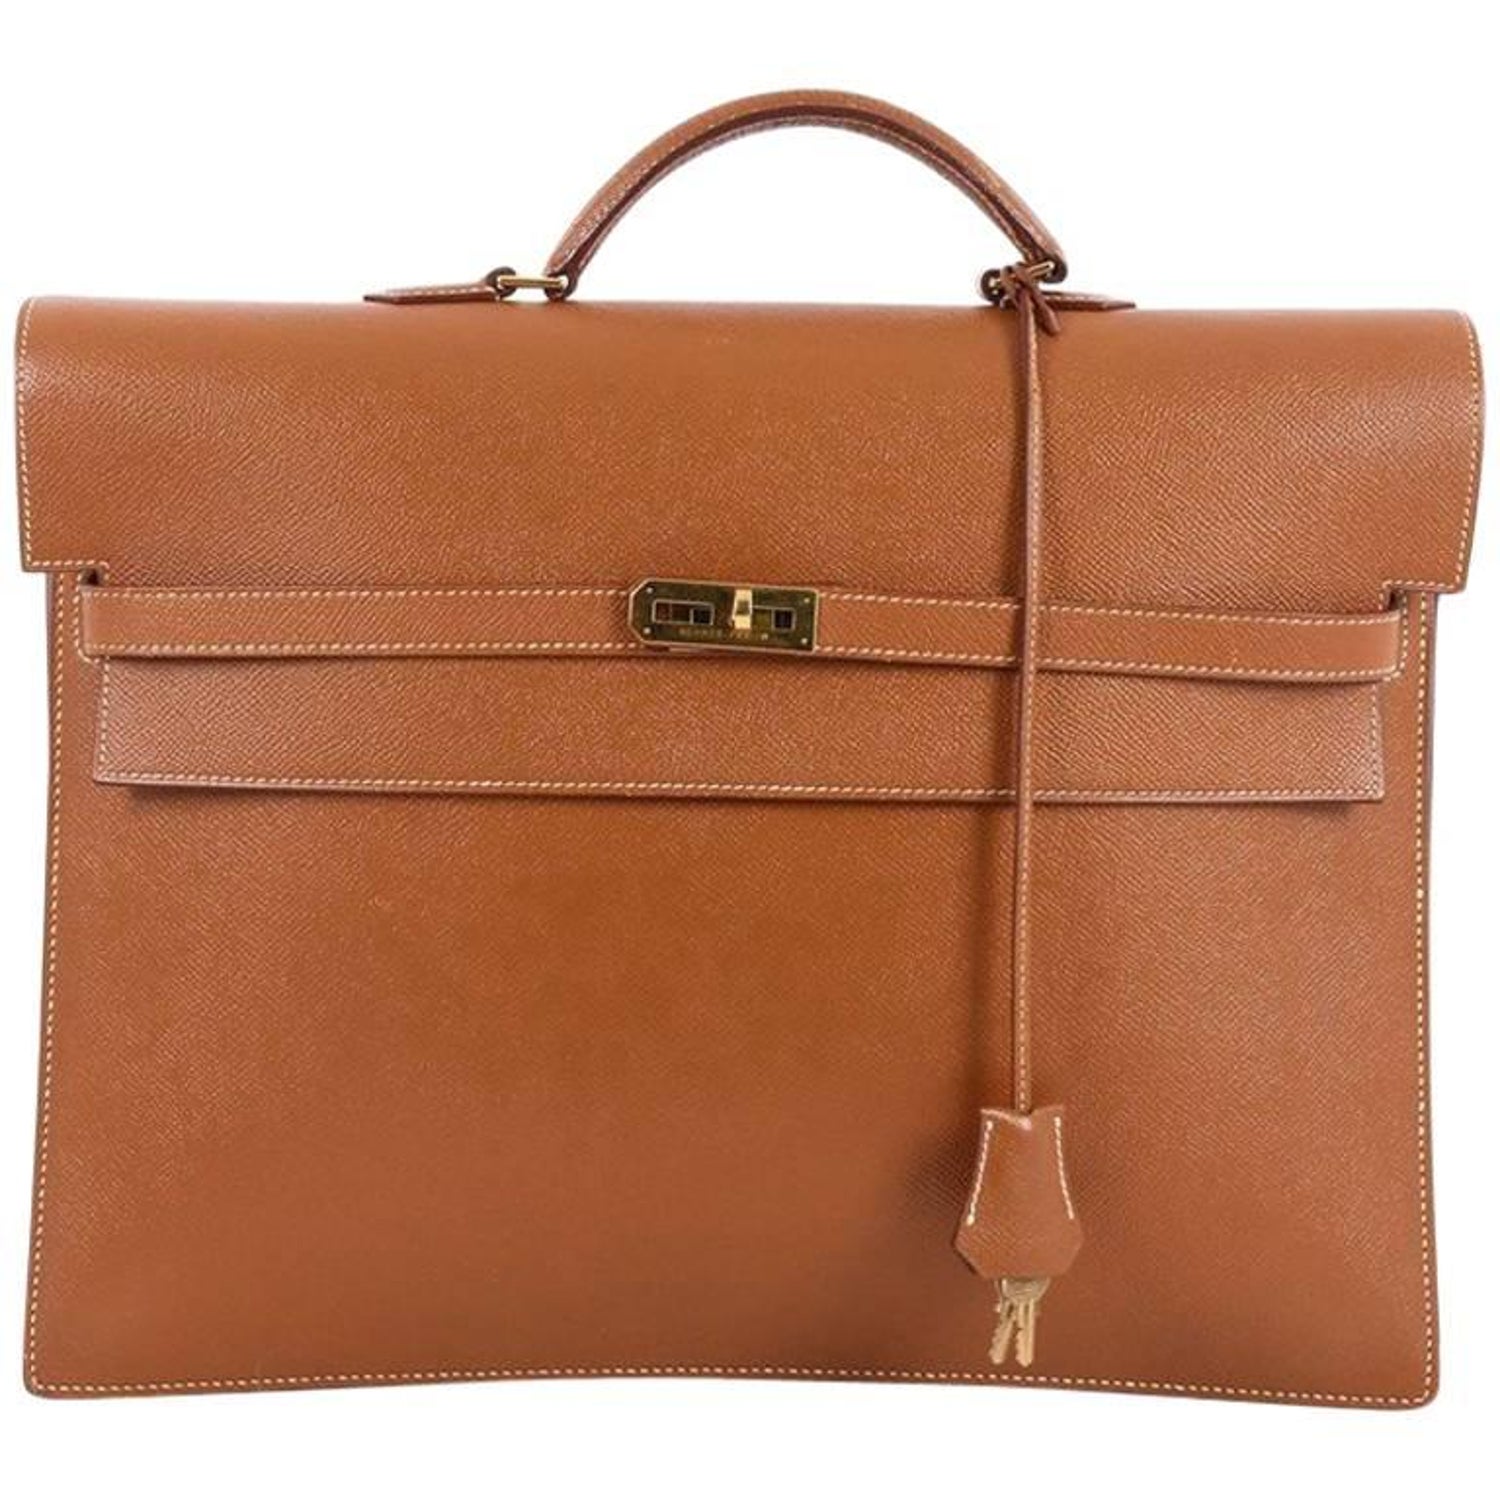 Hermes Herms Tadelakt Kelly Depeche 38 Briefcase, $4,500, TheRealReal